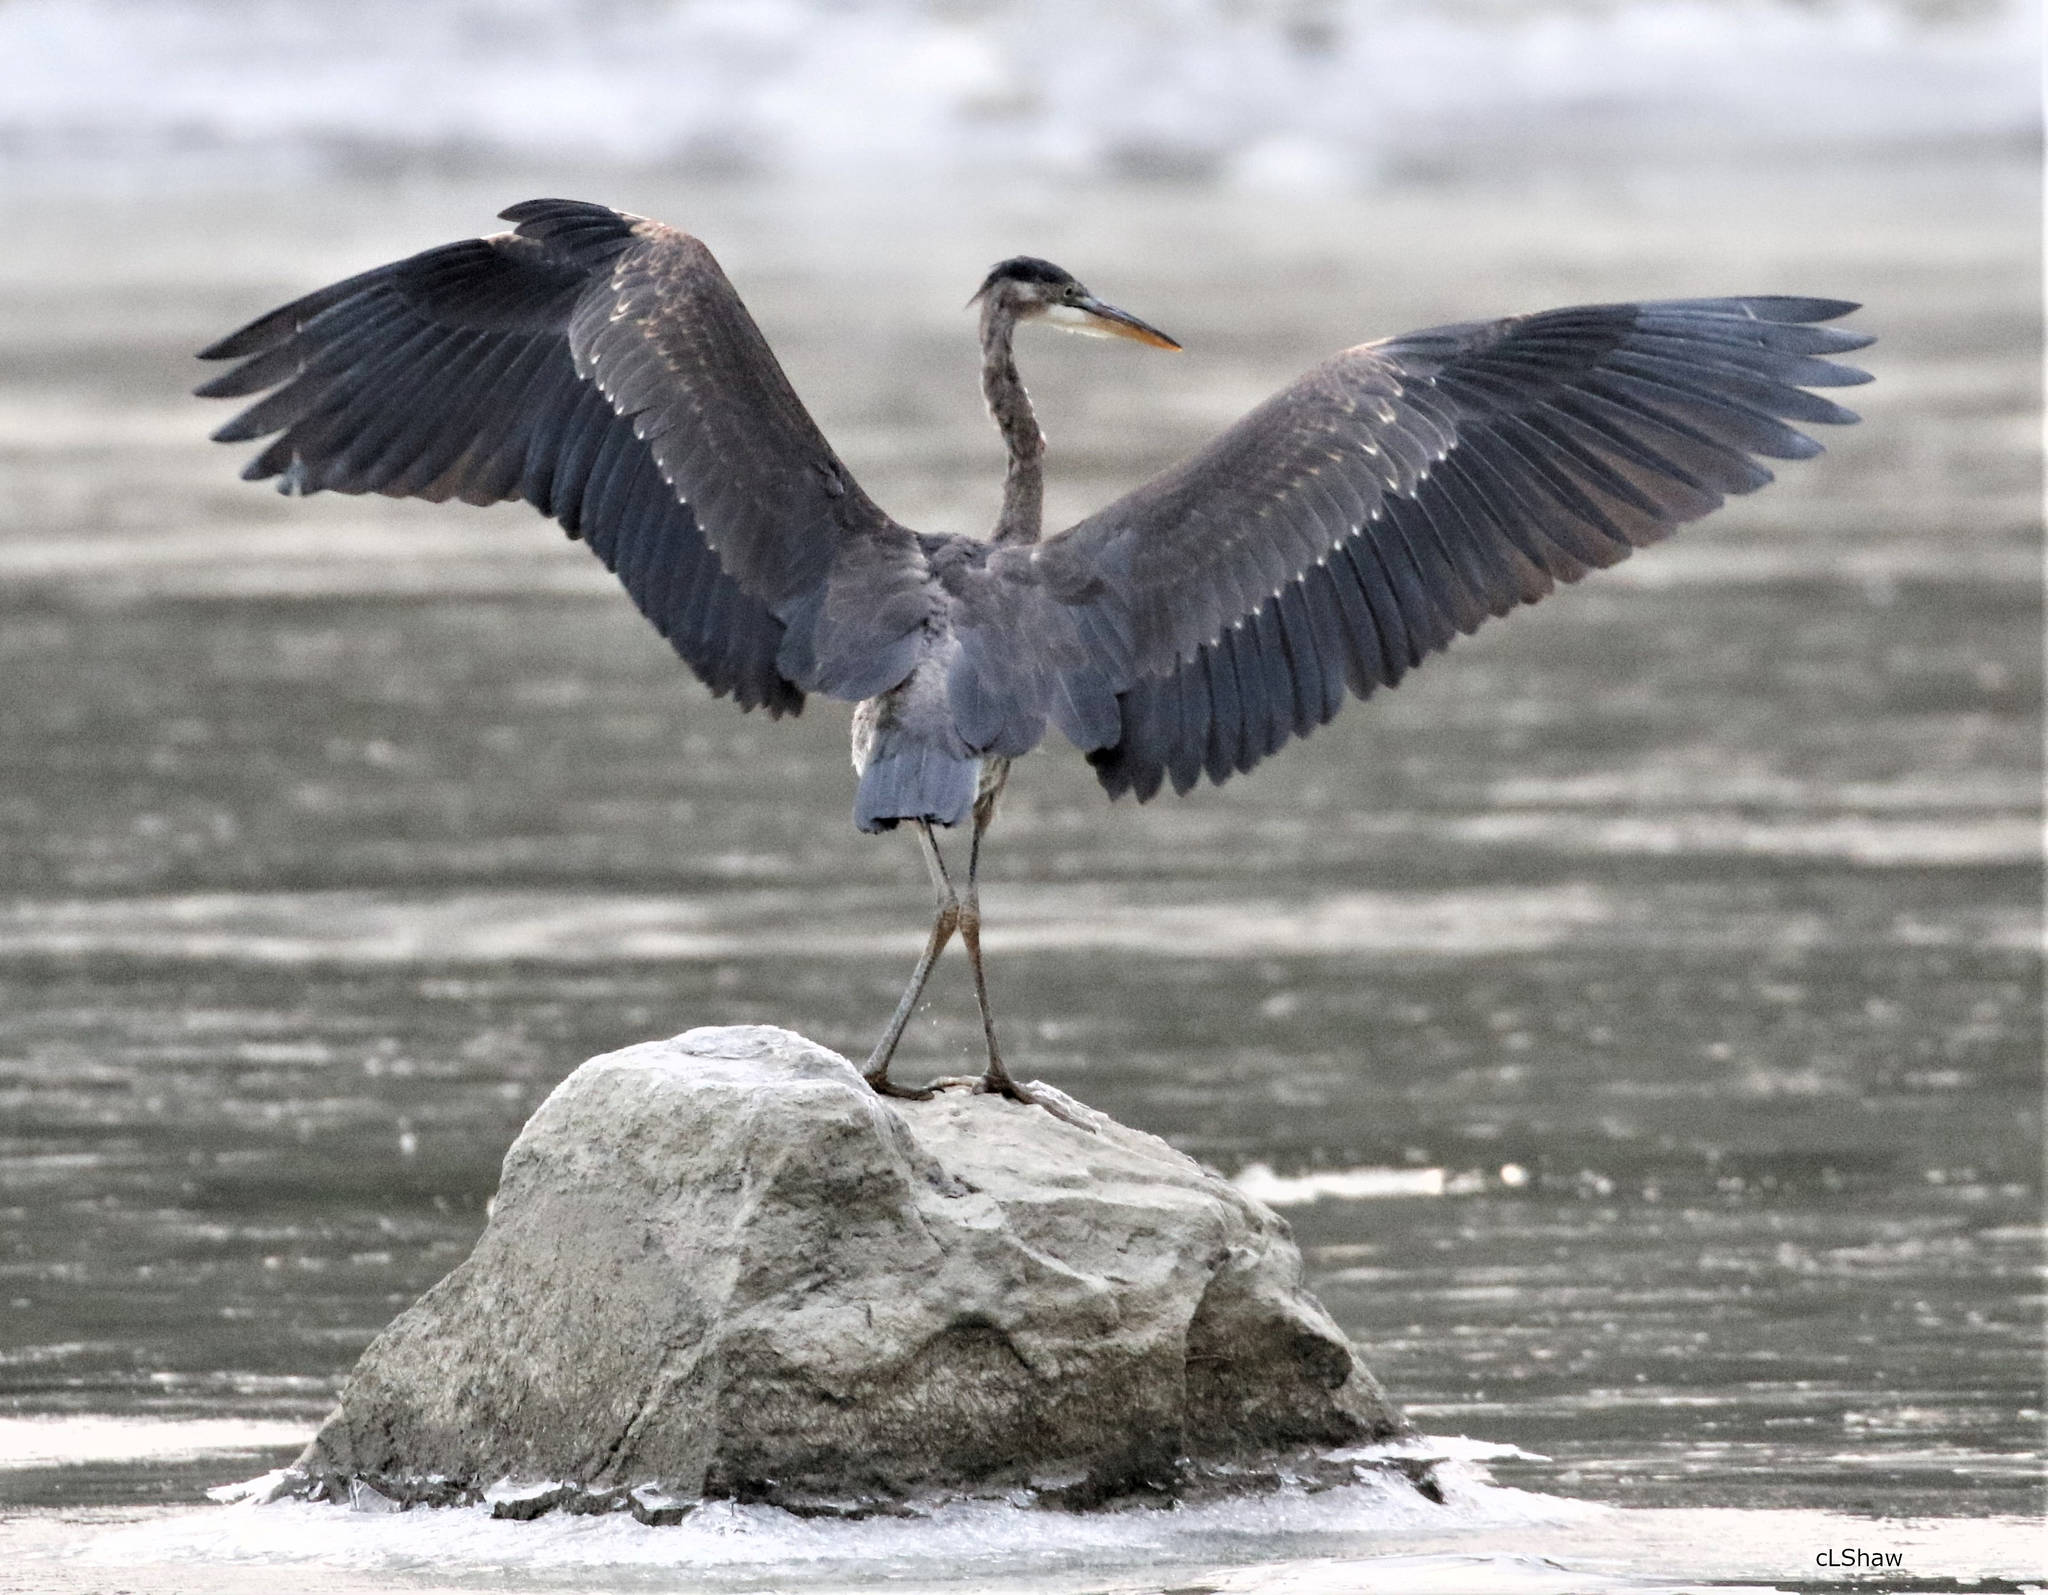 A great blue heron spreads its wings out on an icy Mendenhall Lake yesterday, Oct. 18. (Courtesy Photo / Linda Shaw)